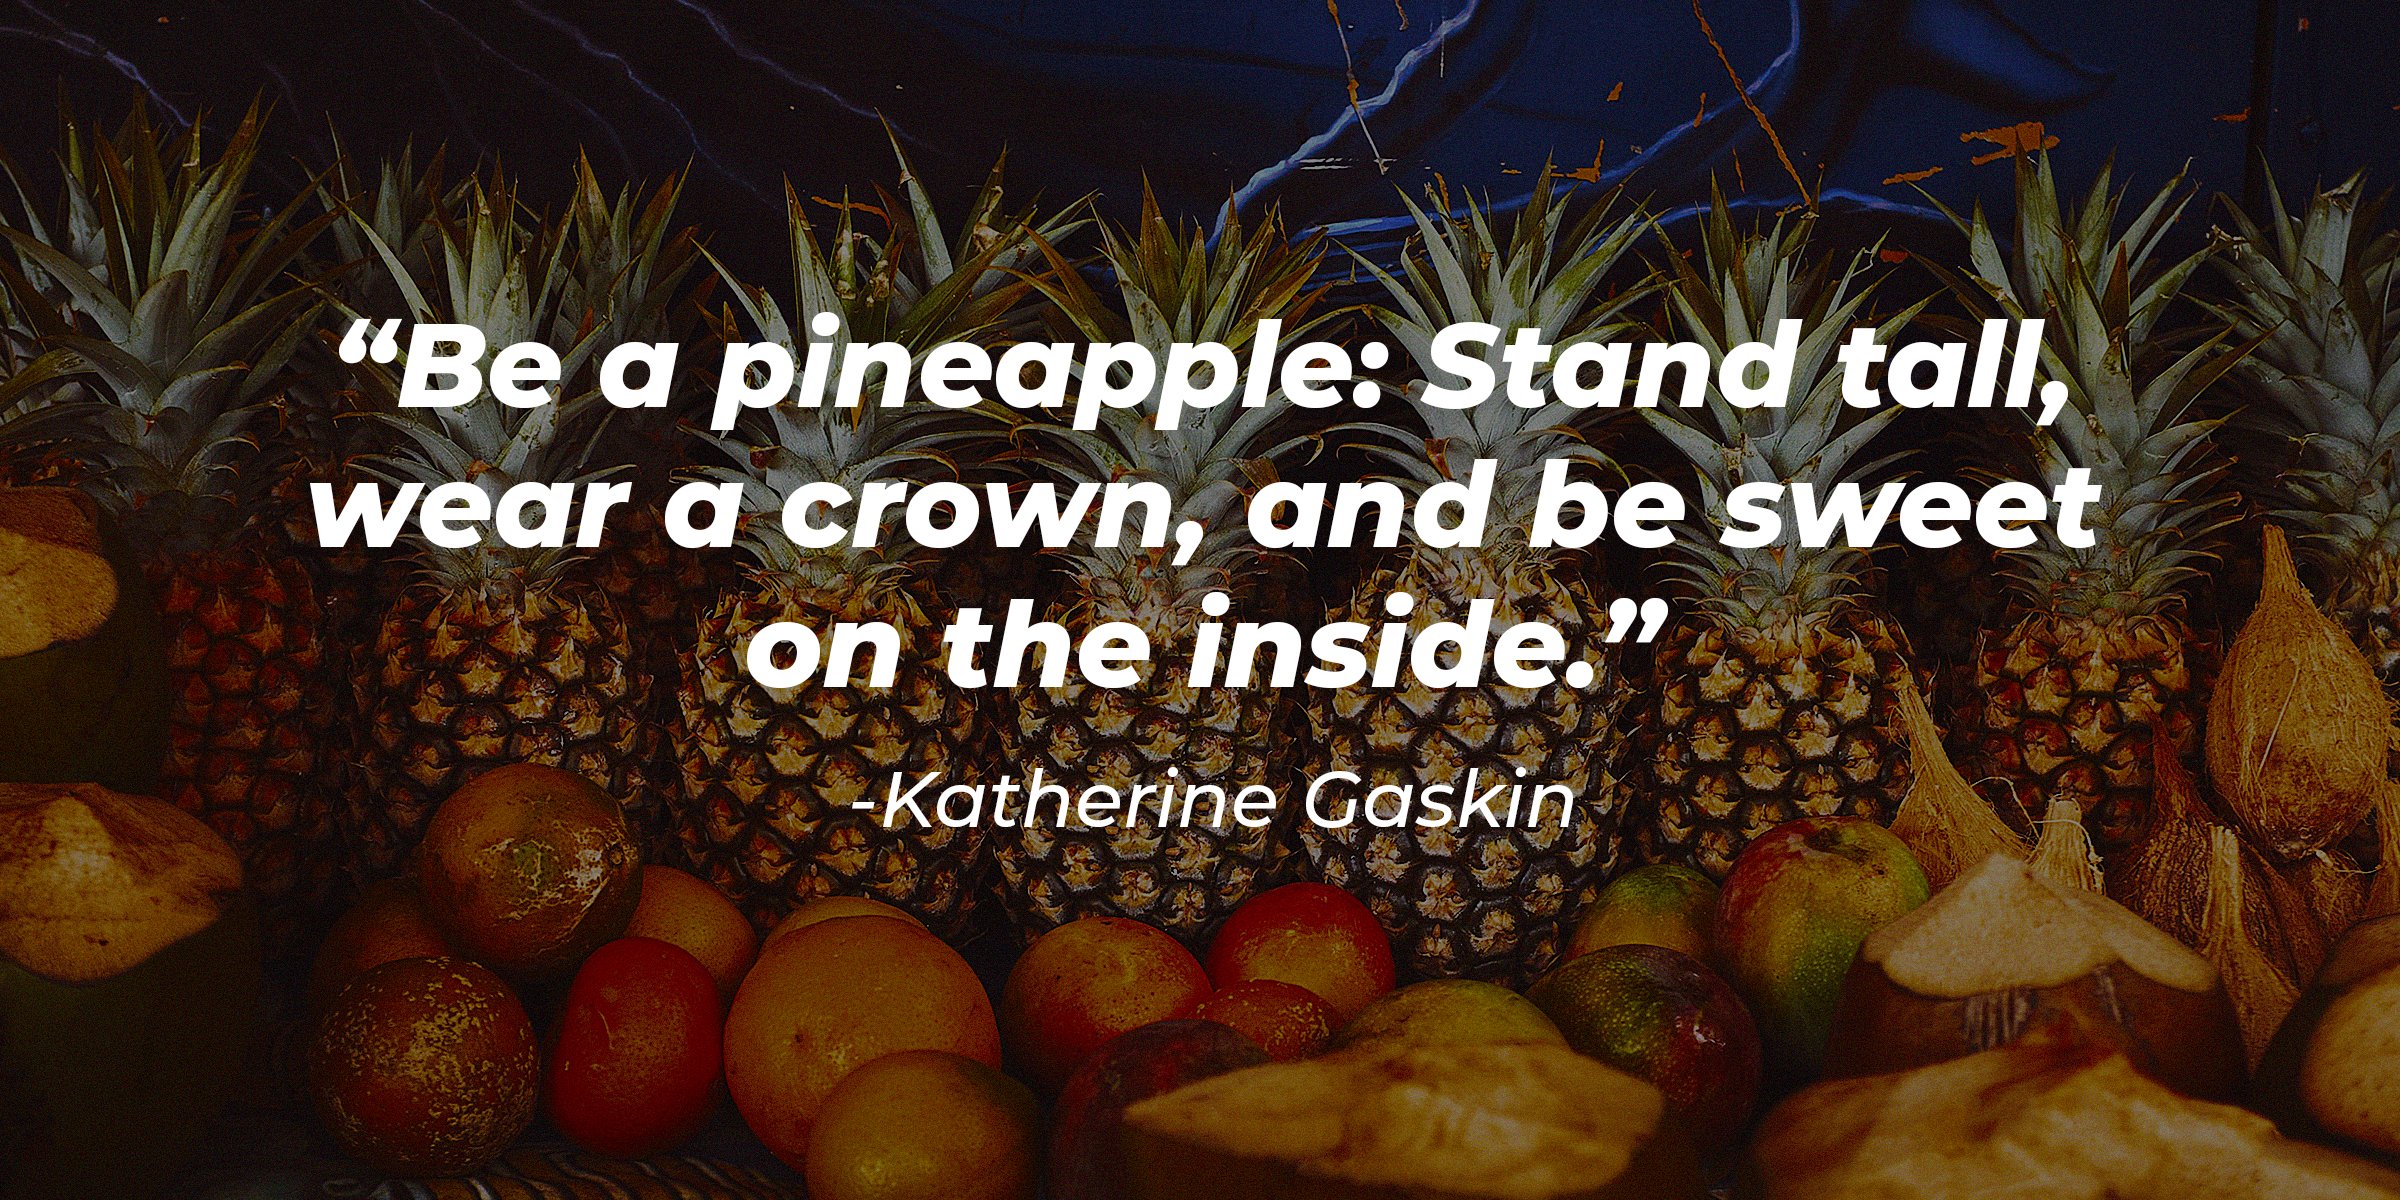 Source: Unsplash | A row of pineapples with the quote "Be a pineapple: Stand tall, wear a crown, and be sweet on the inside," by Katherine Gaskin